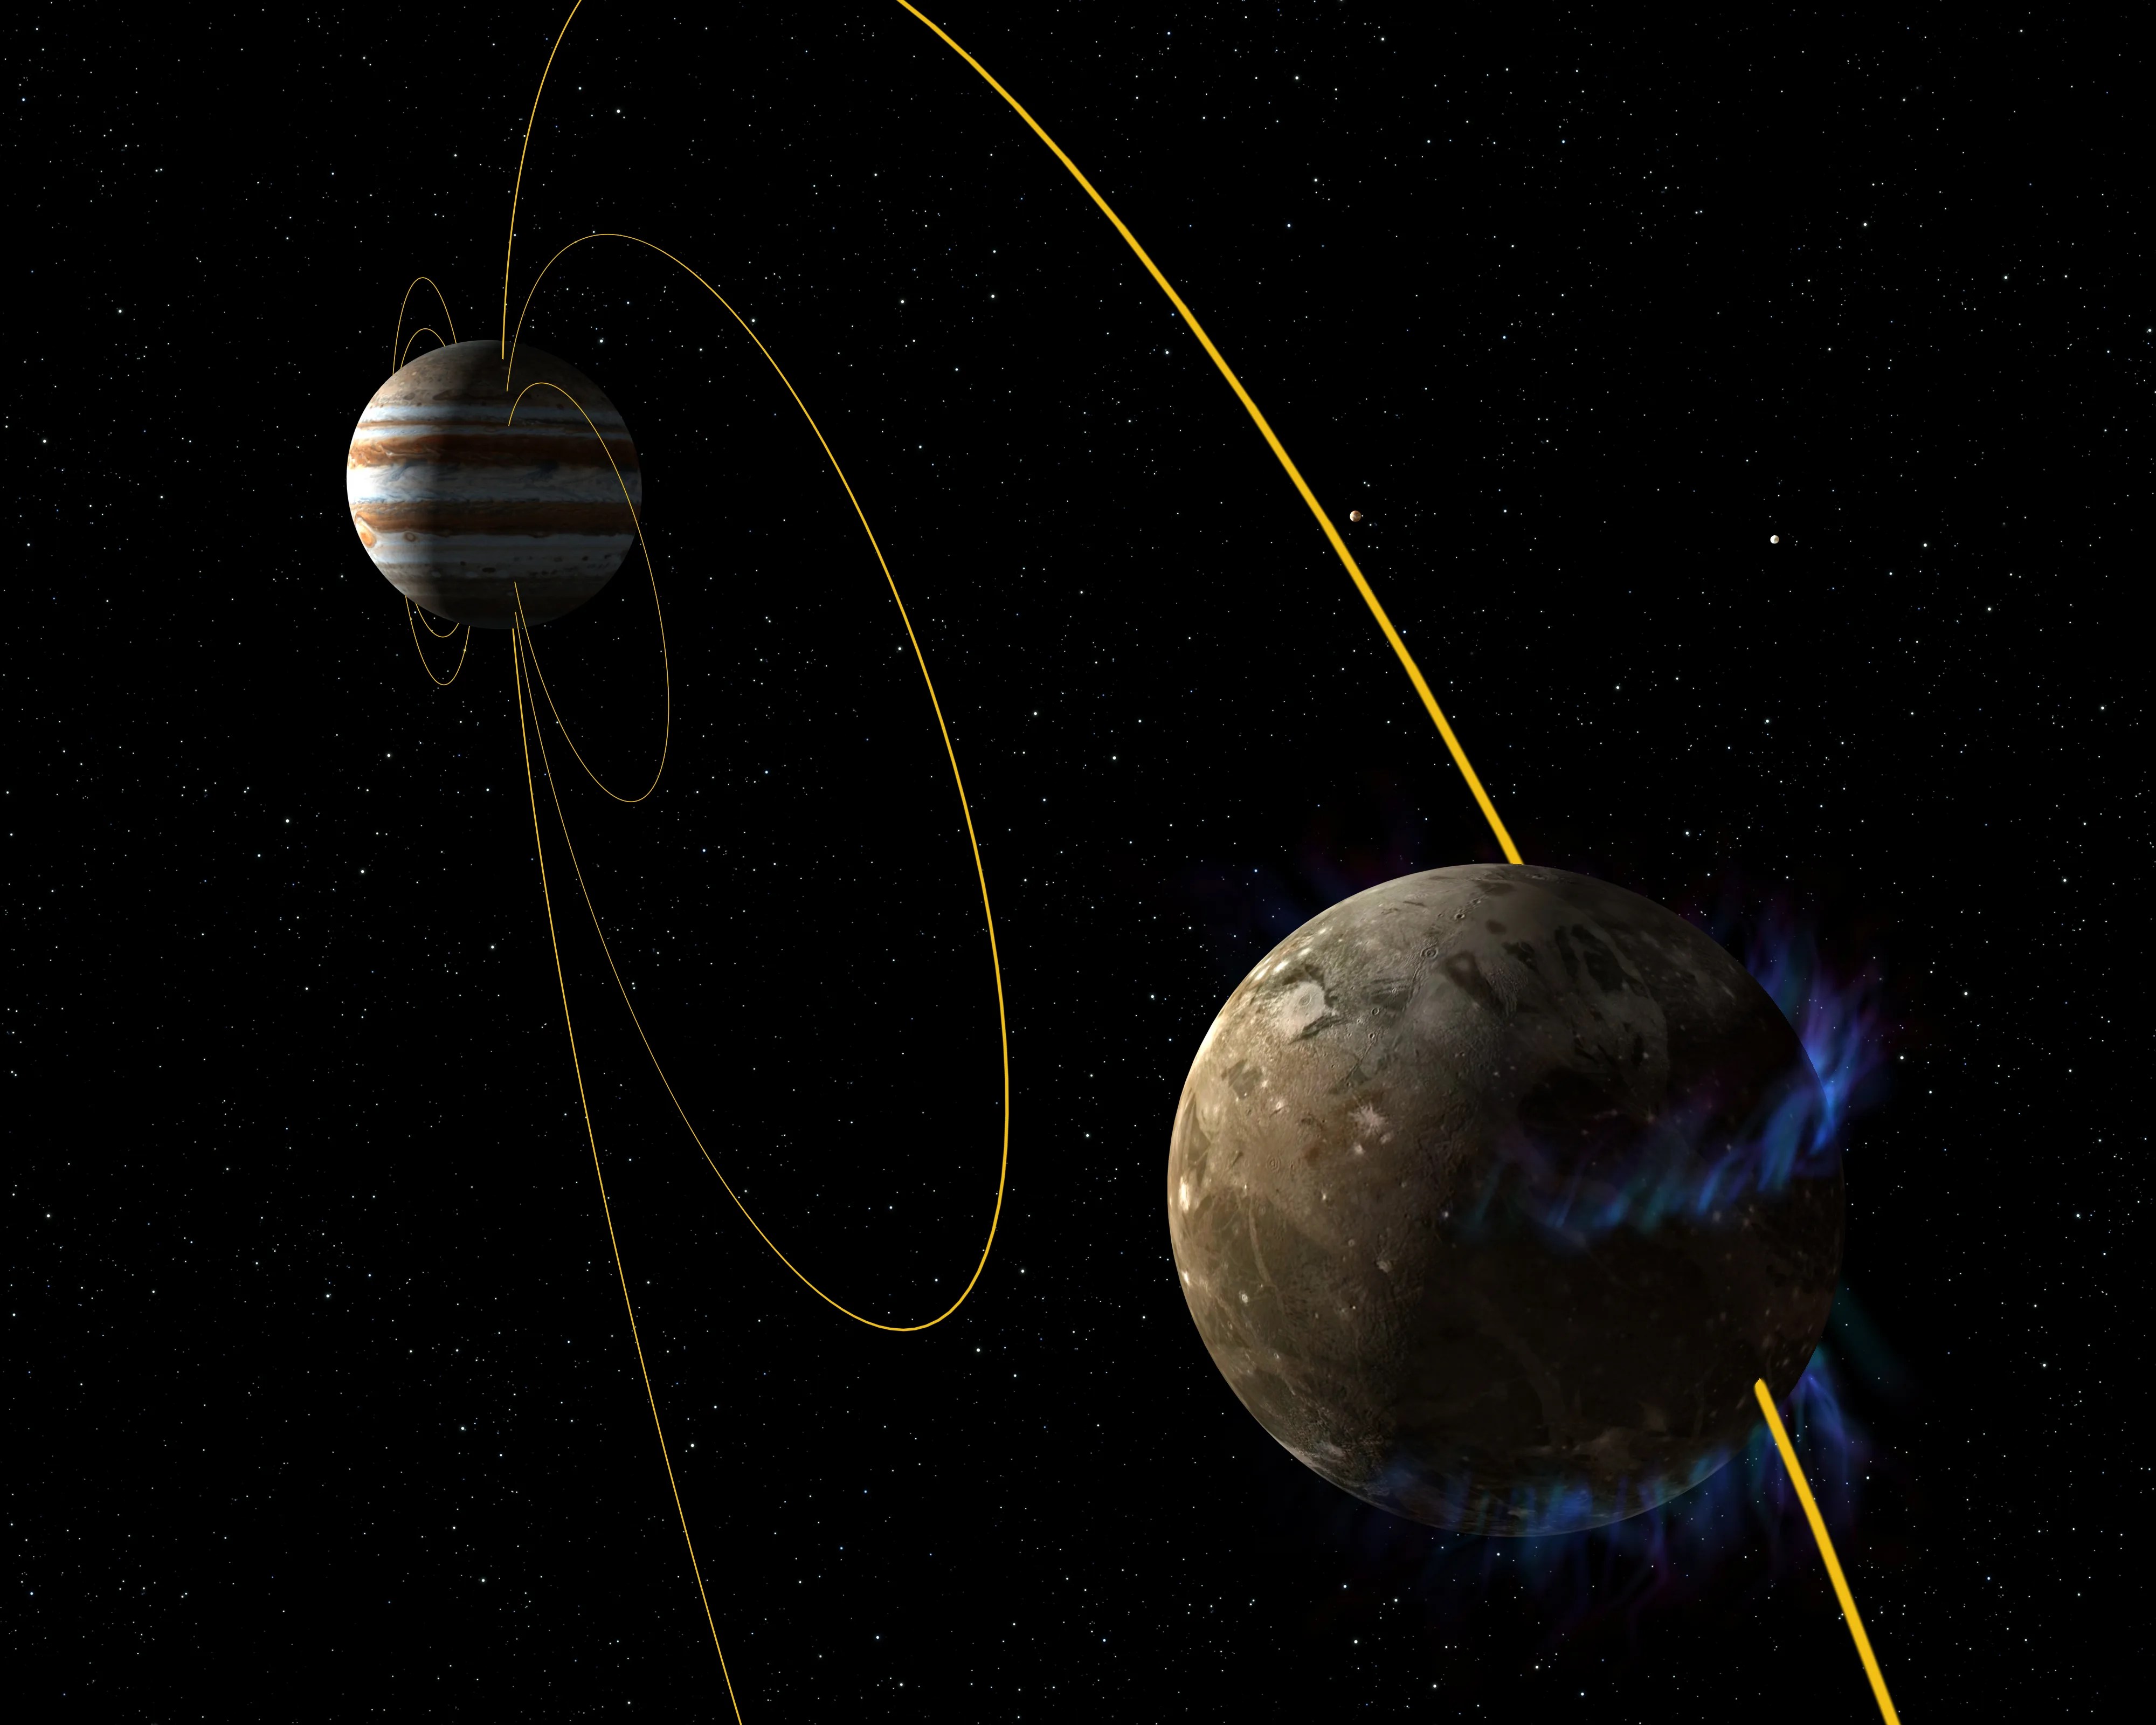 In this artist’s concept, the moon Ganymede orbits the giant planet Jupiter.